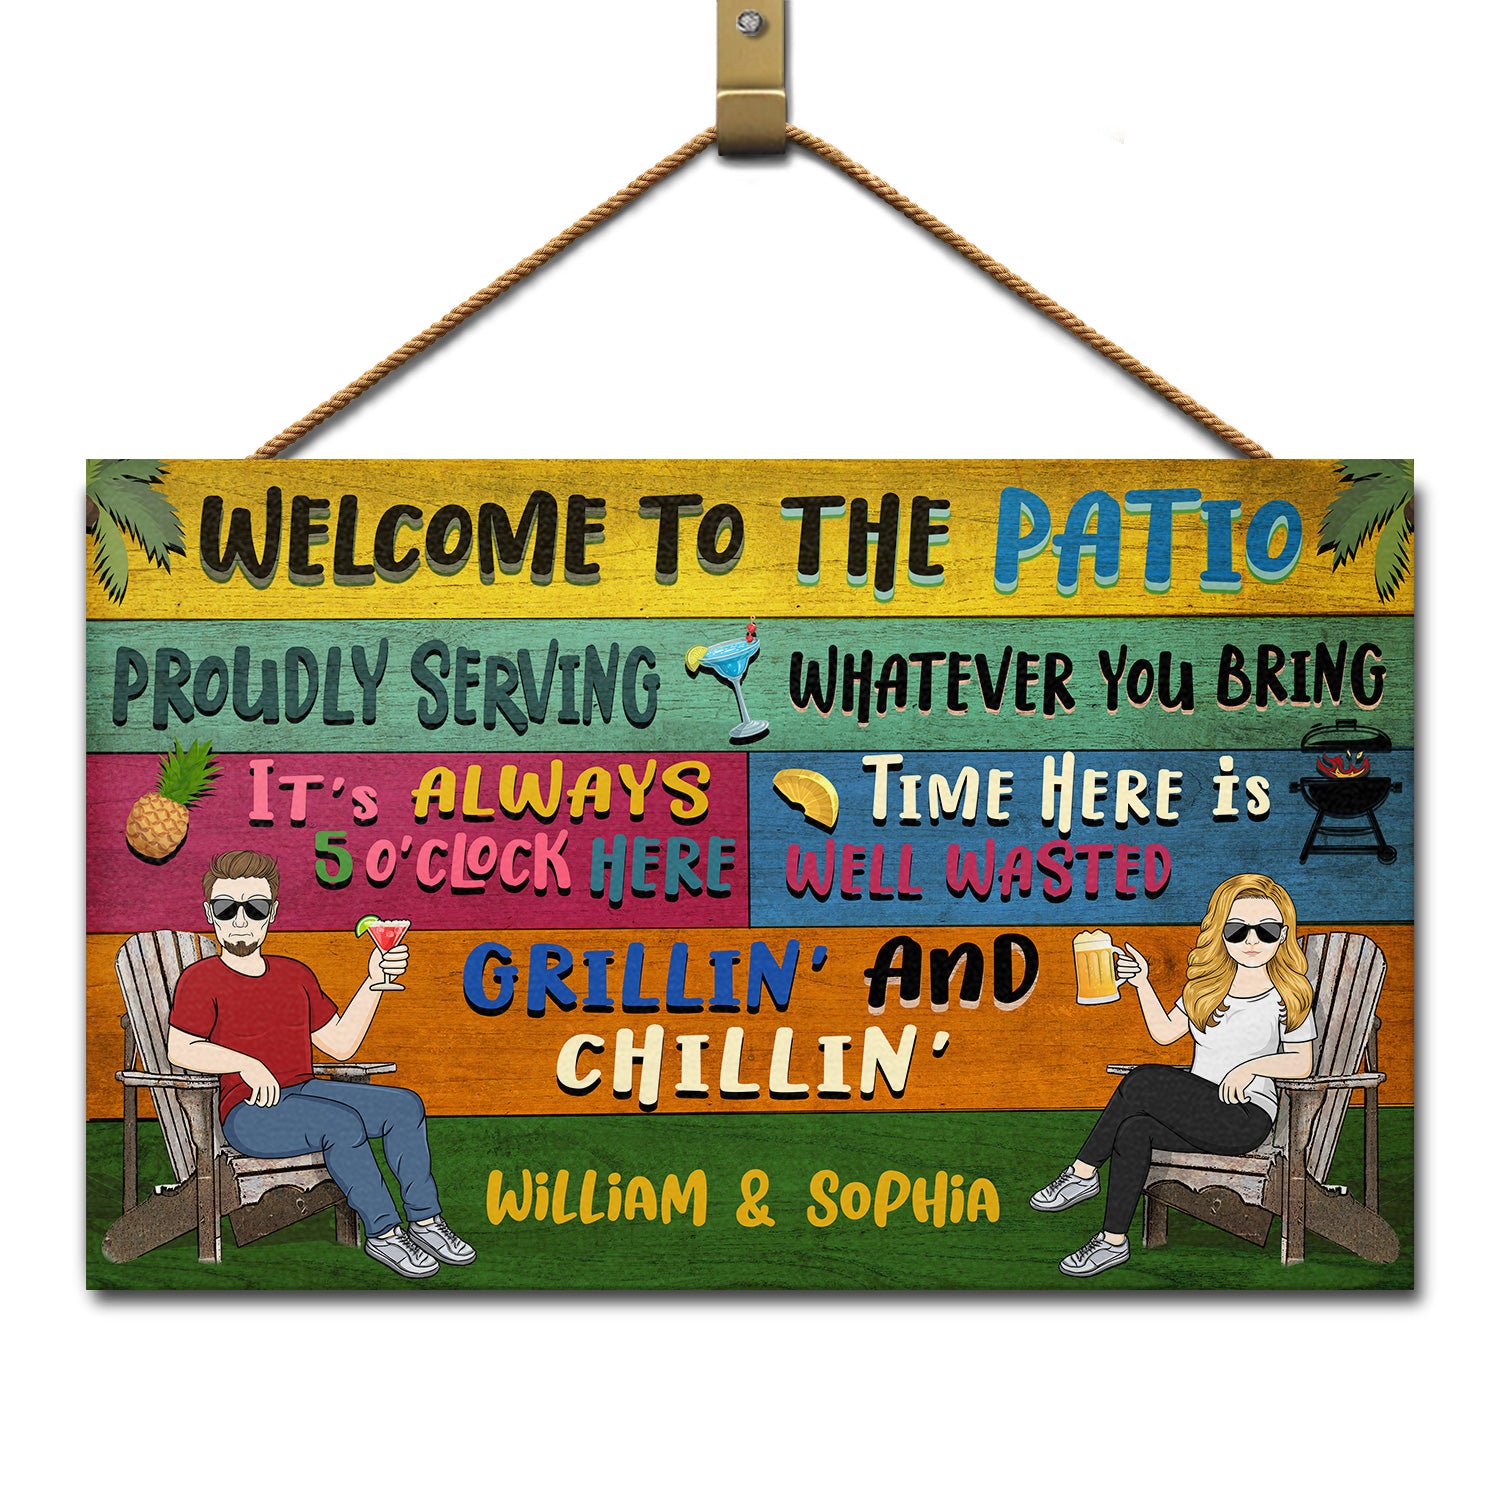 Patio Welcome Grilling Proudly Serving Whatever You Bring Couple Single - Home Decor, Backyard Decor, Gift For Her, Him, Family, Couples, Husband, Wife - Personalized Custom Wood Rectangle Sign